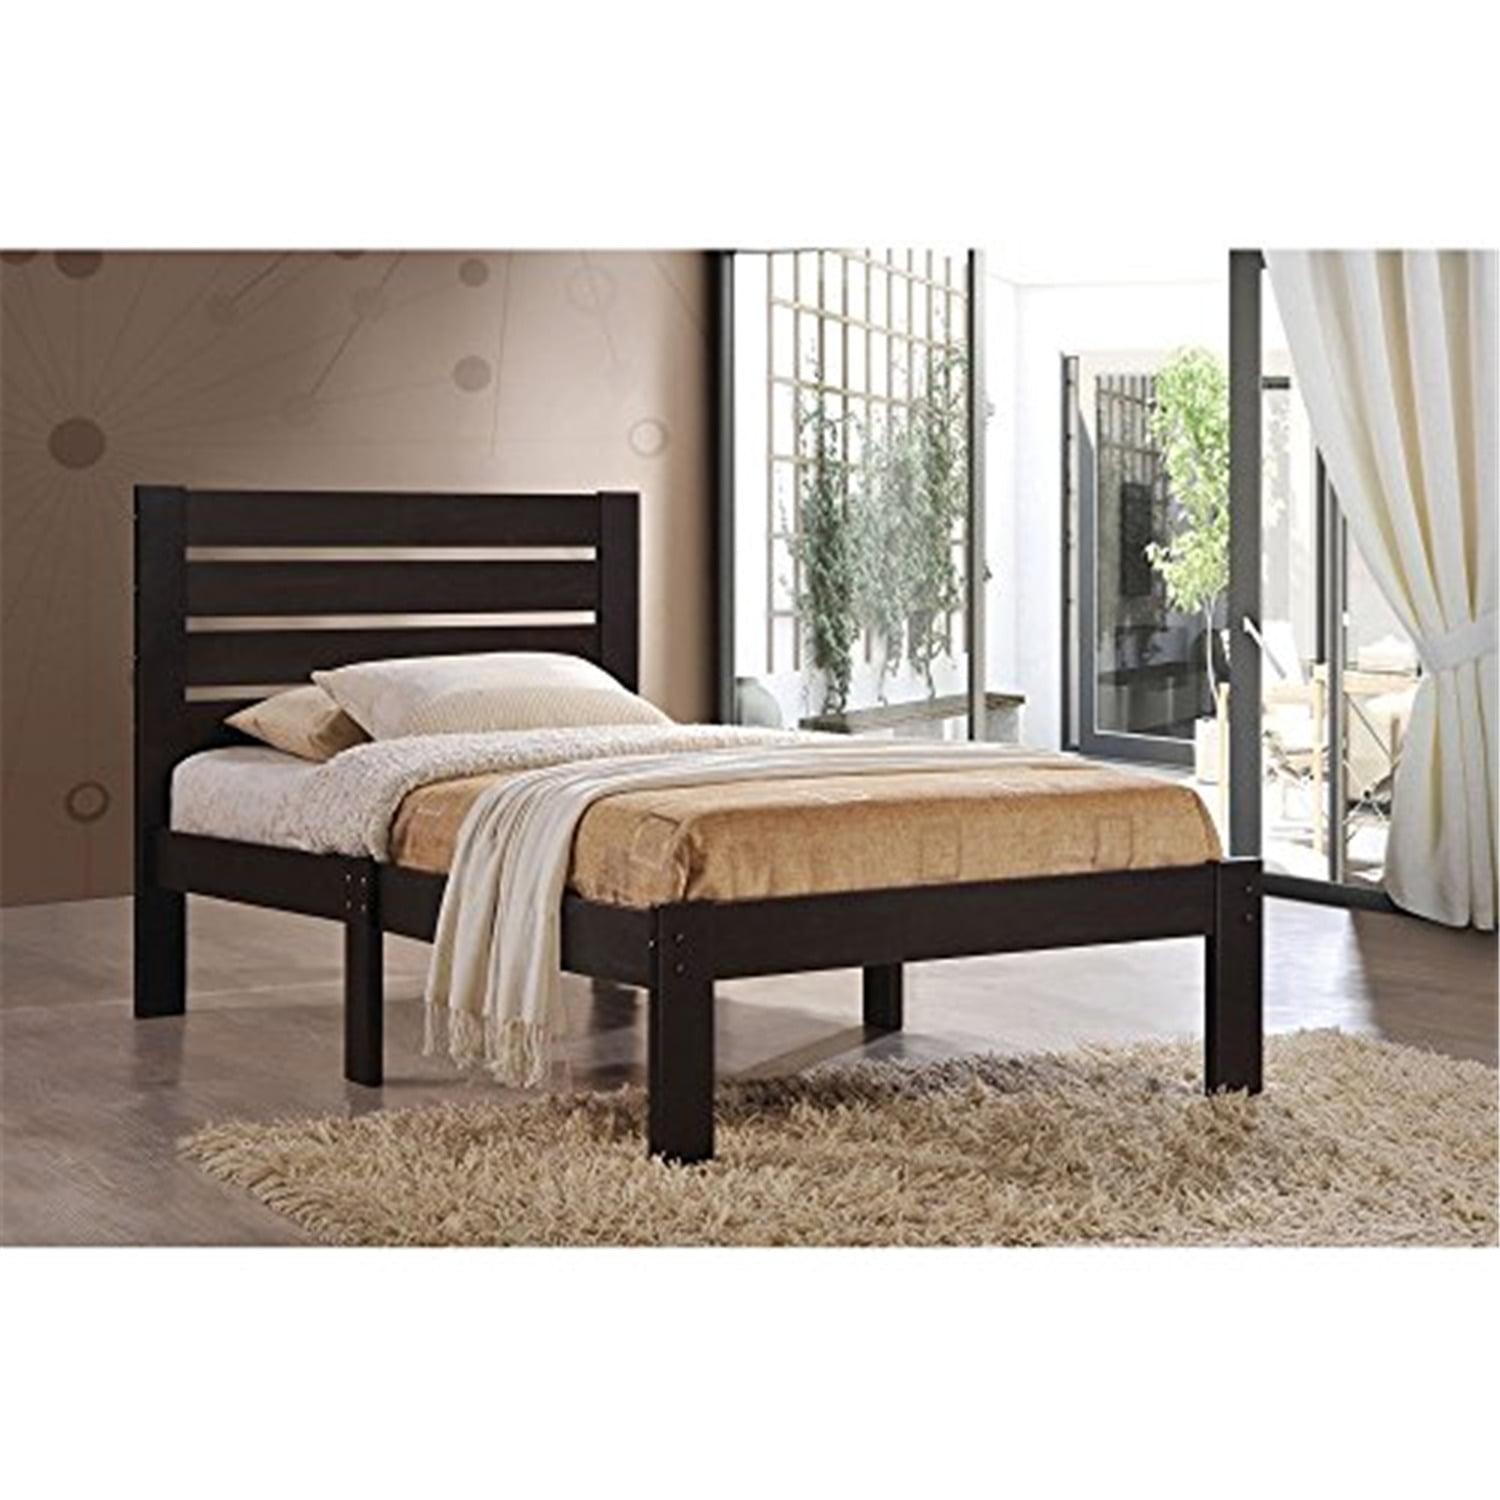 Casual Classic Full Bed with Wooden Slatted Headboard in Espresso